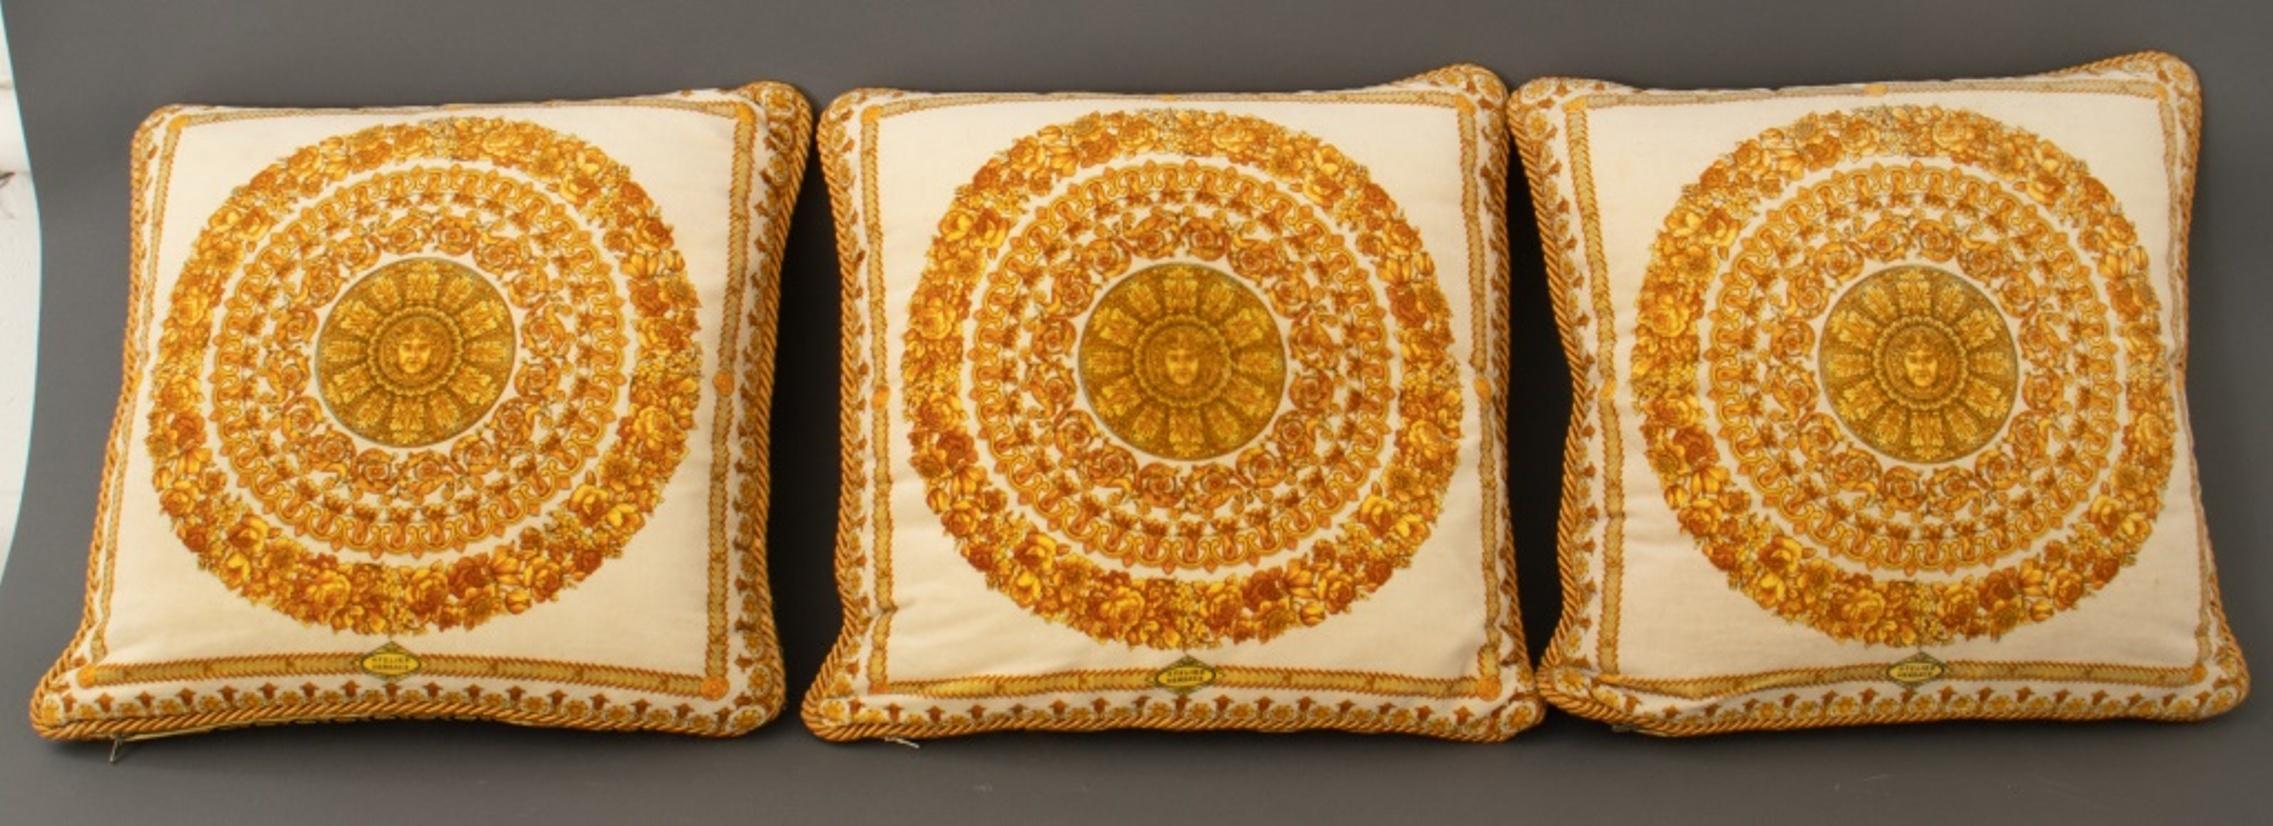 Group of Versace velvet throw pillows, 3, each depicting the Medusa head motif and signed 